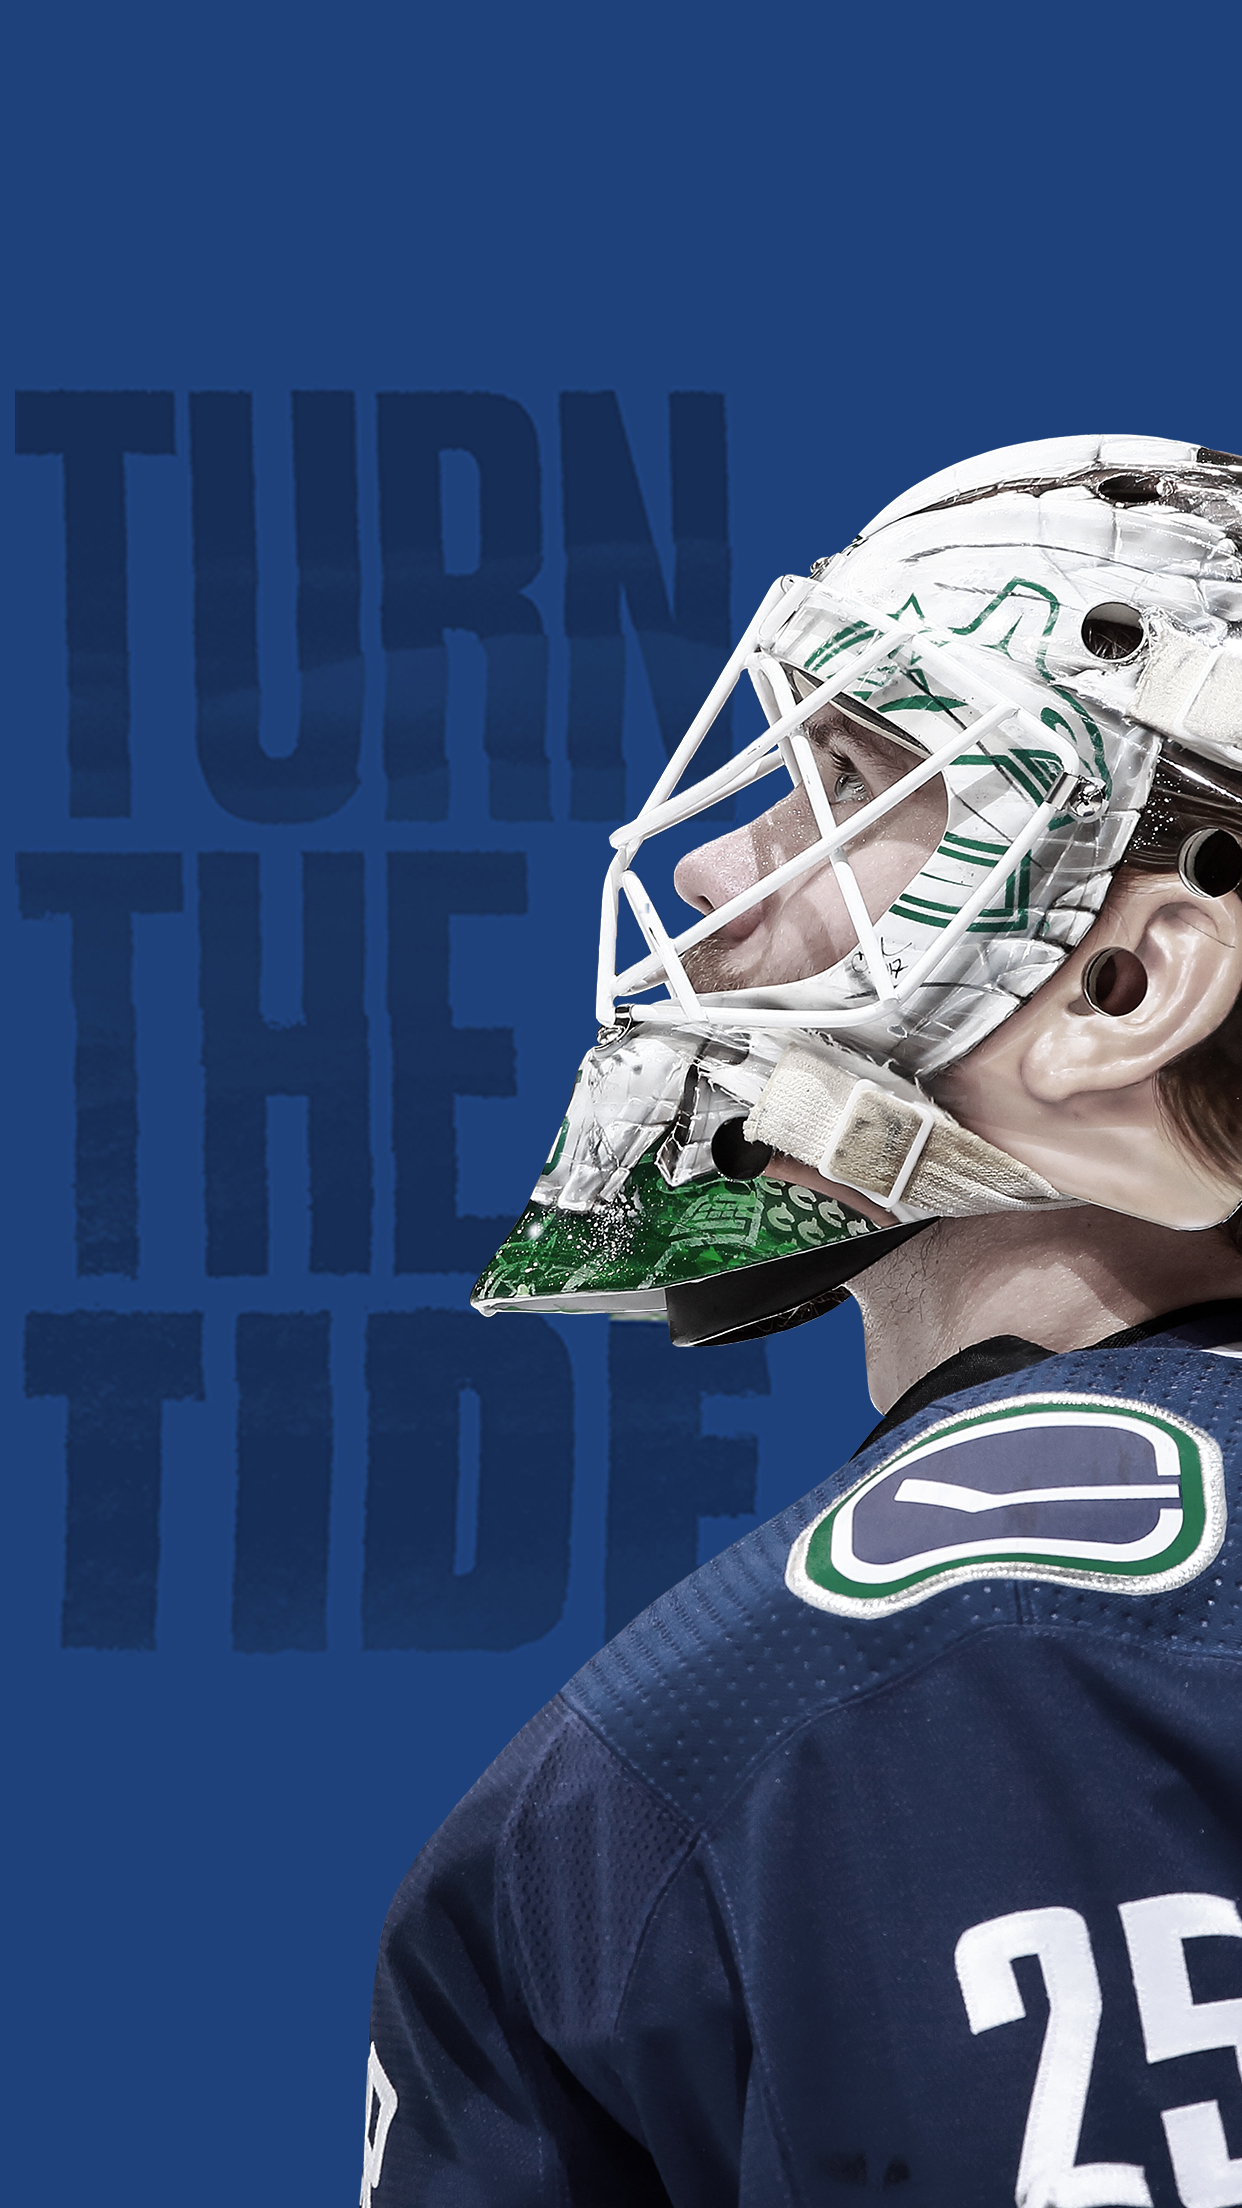 Free download Vancouver Canucks Iphone Wallpaper A few canucks